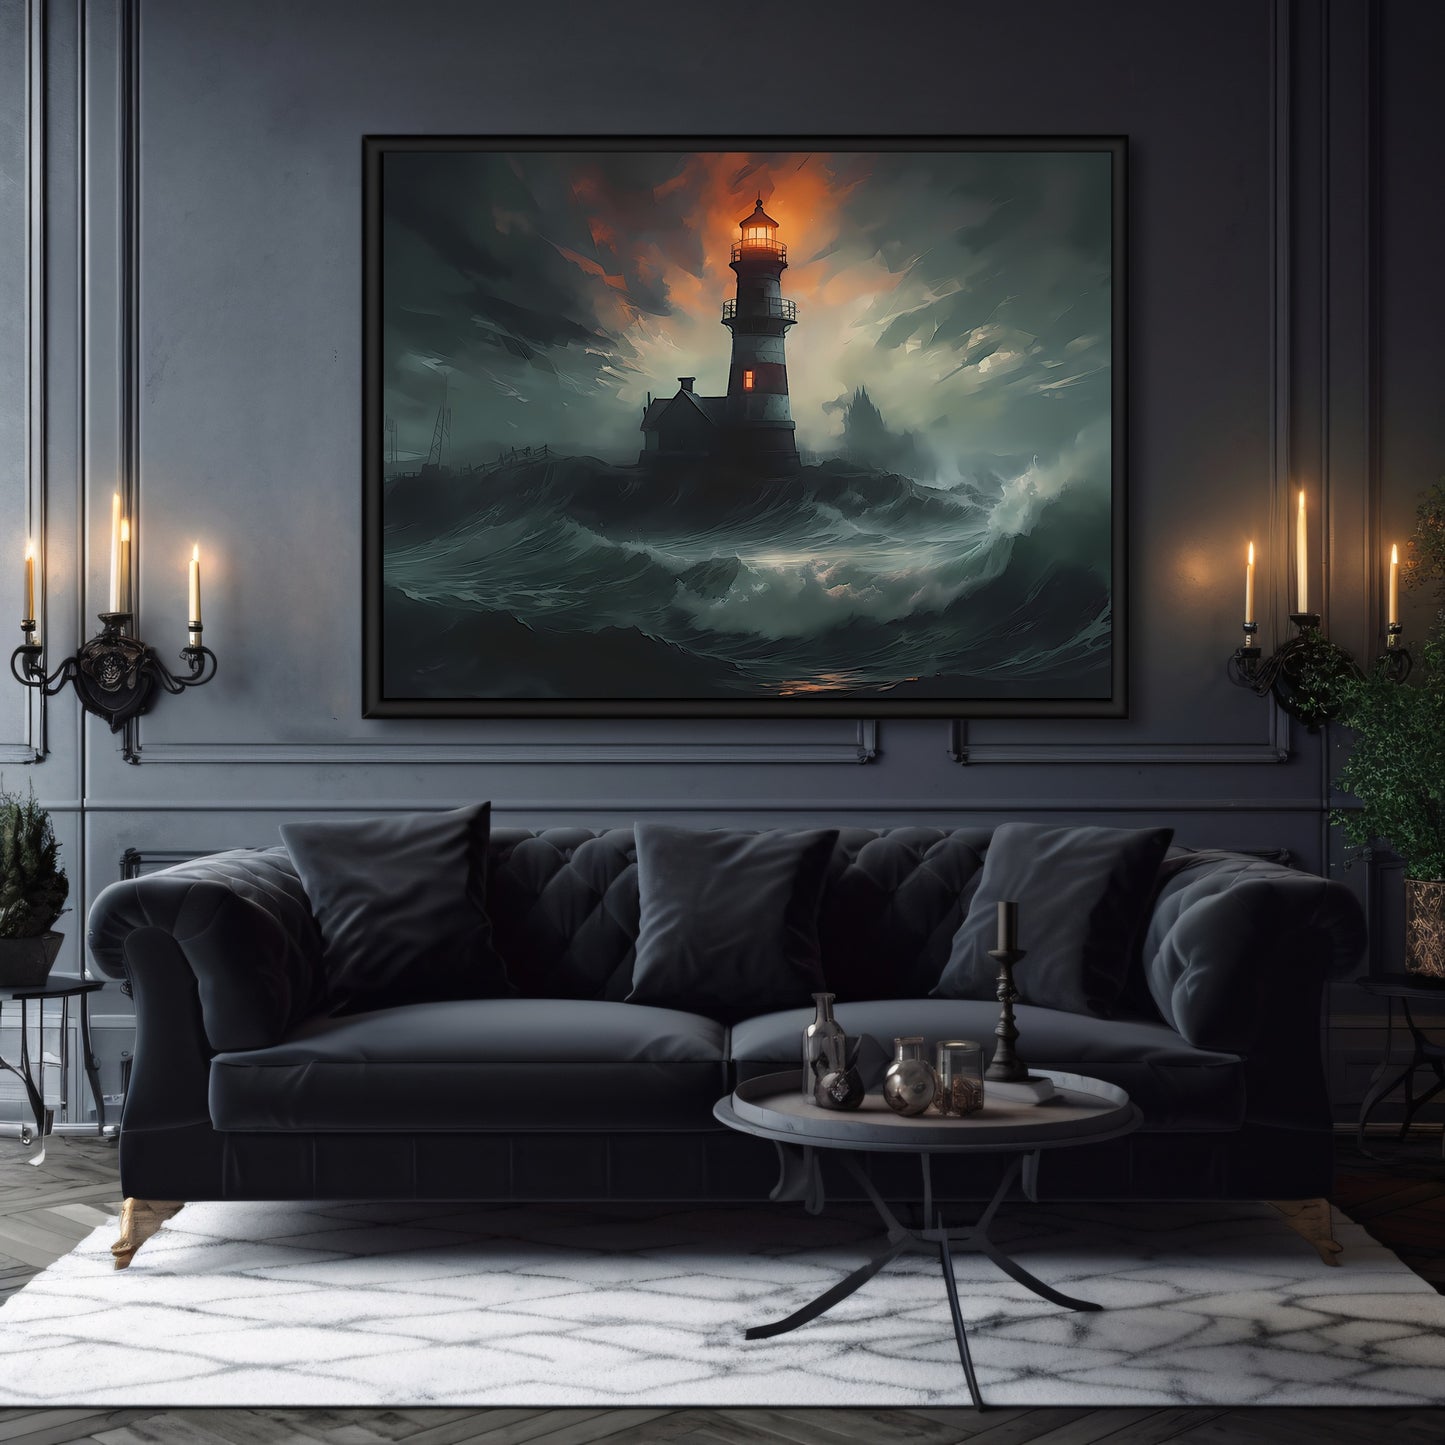 Lighthouse in Stormy Sea Gothic Wall Art Paper Poster Prints Vintage Seascape Painting Dark Academia Print Dark Aesthetic Room Decor Nautical Artwork